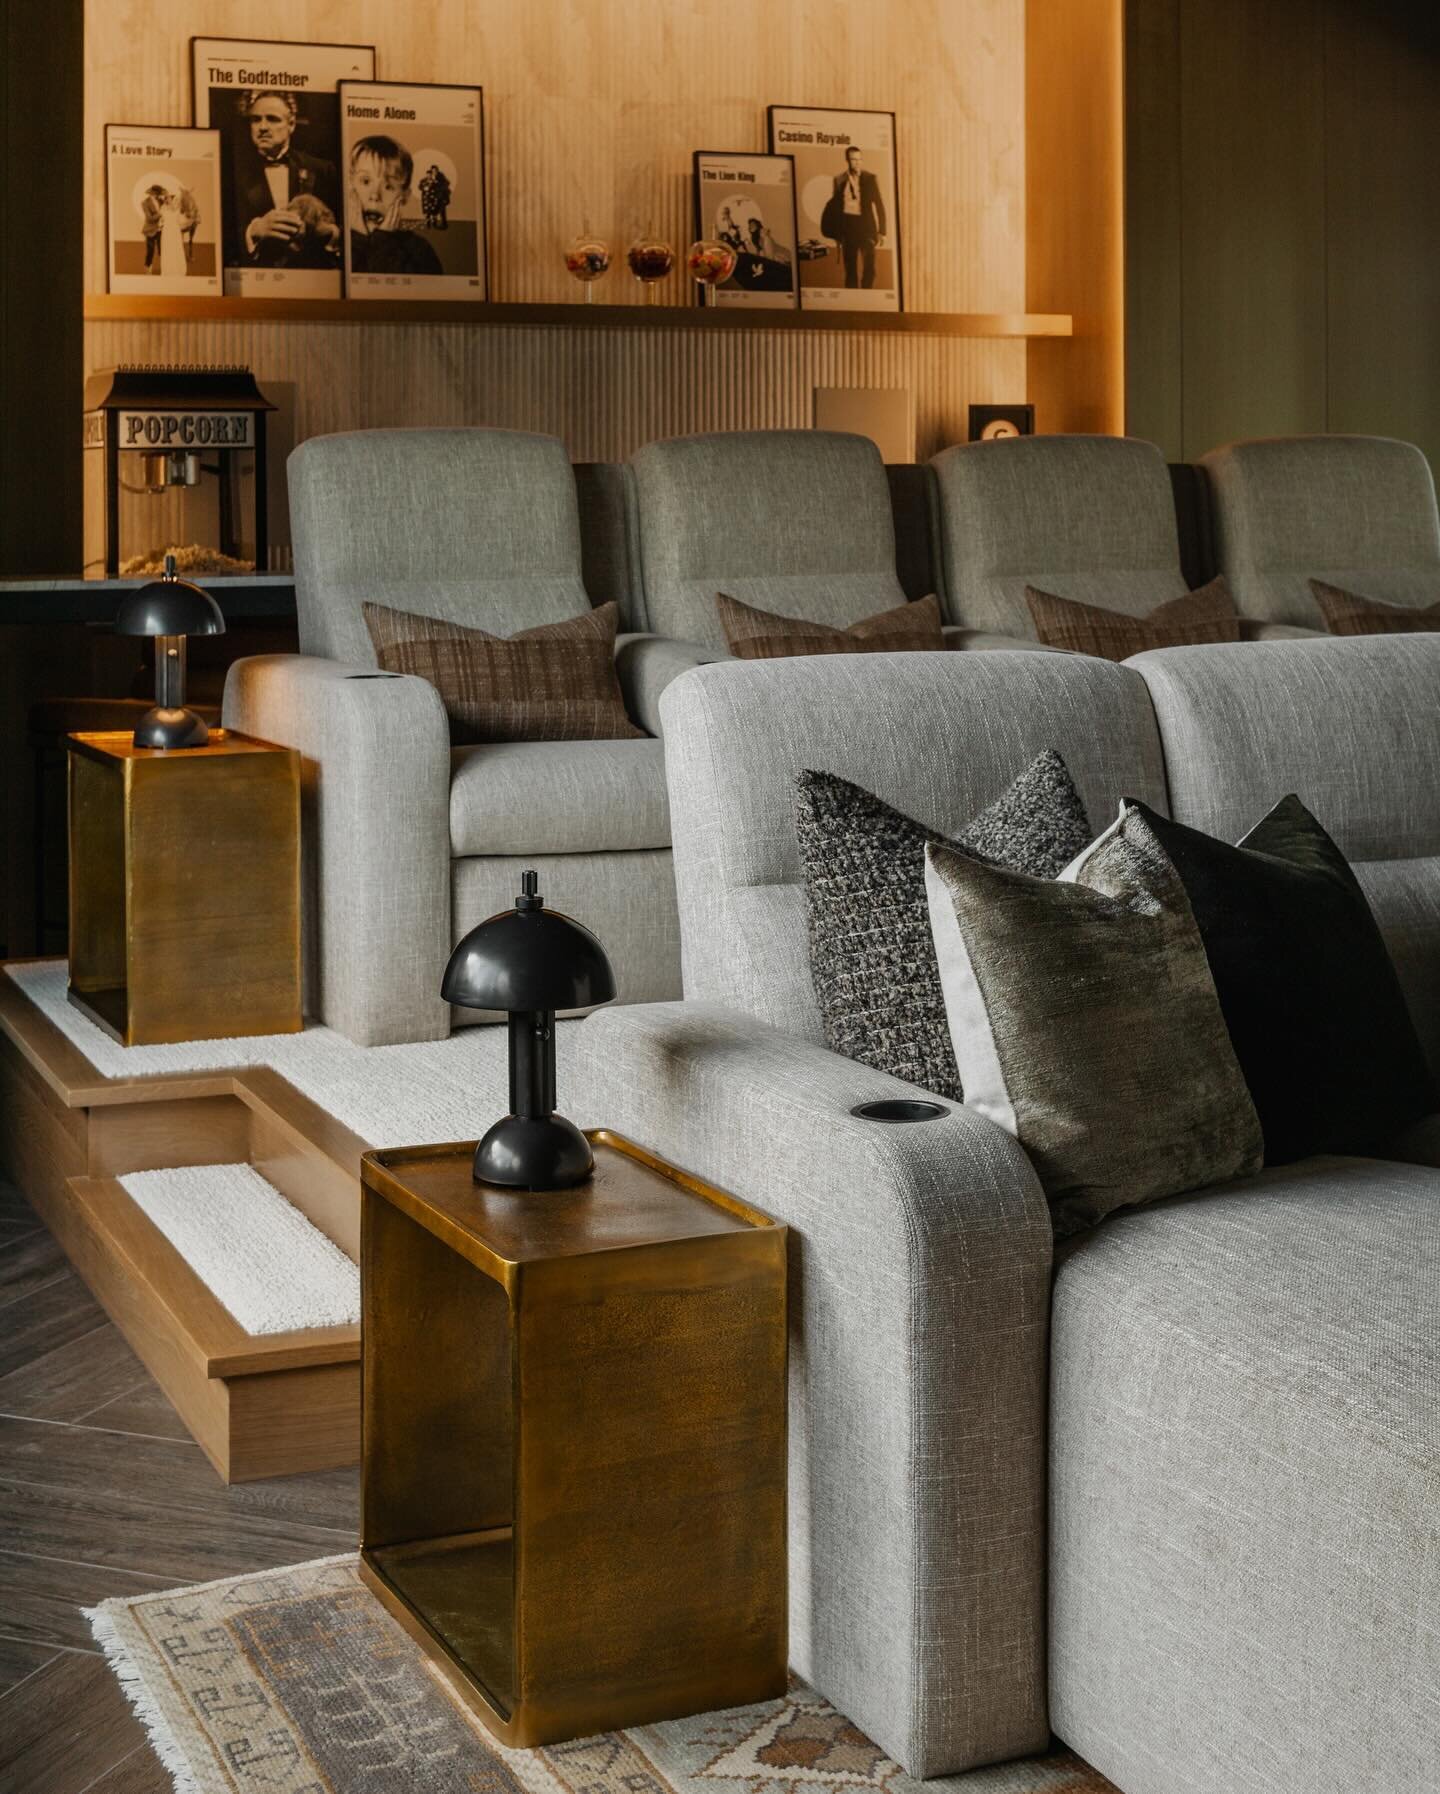 Reveal day! We recently put the finishing touches on this moody home theater renovation and we&rsquo;re so excited to share the images here today. 

Our clients tasked us with taking their outdated home theater and turning it into a cozy, inviting sp